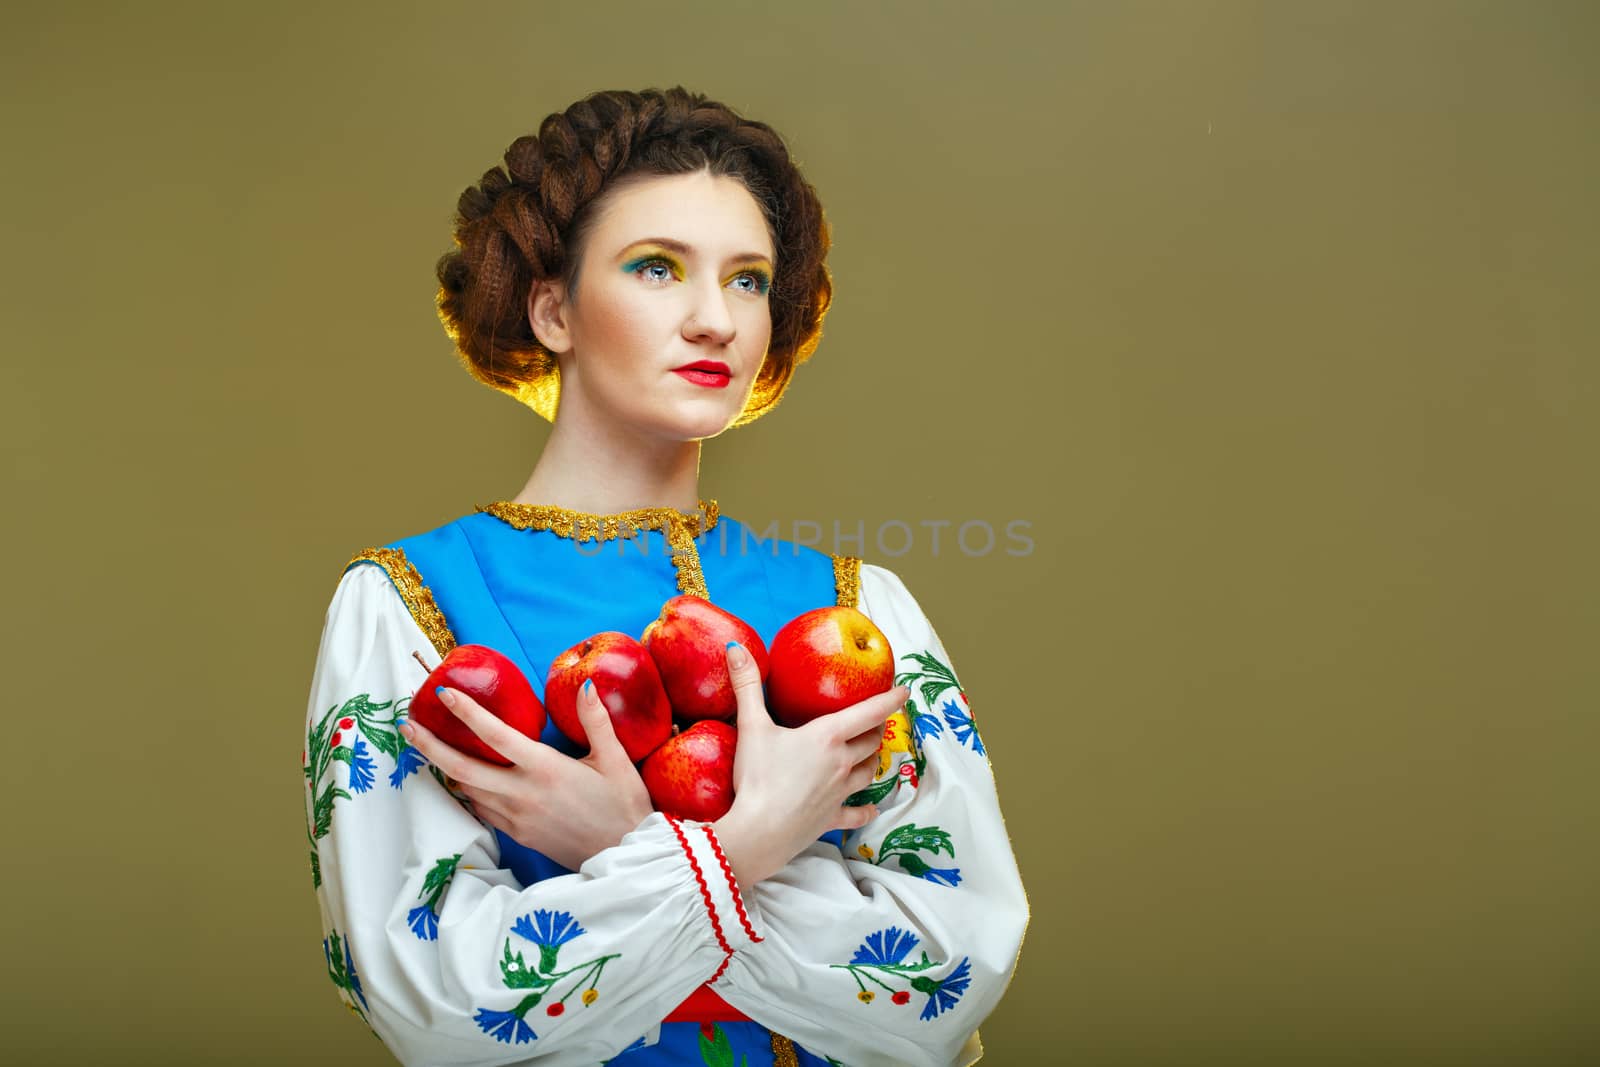 Young attractive girl in national costume eastern europe holding apples